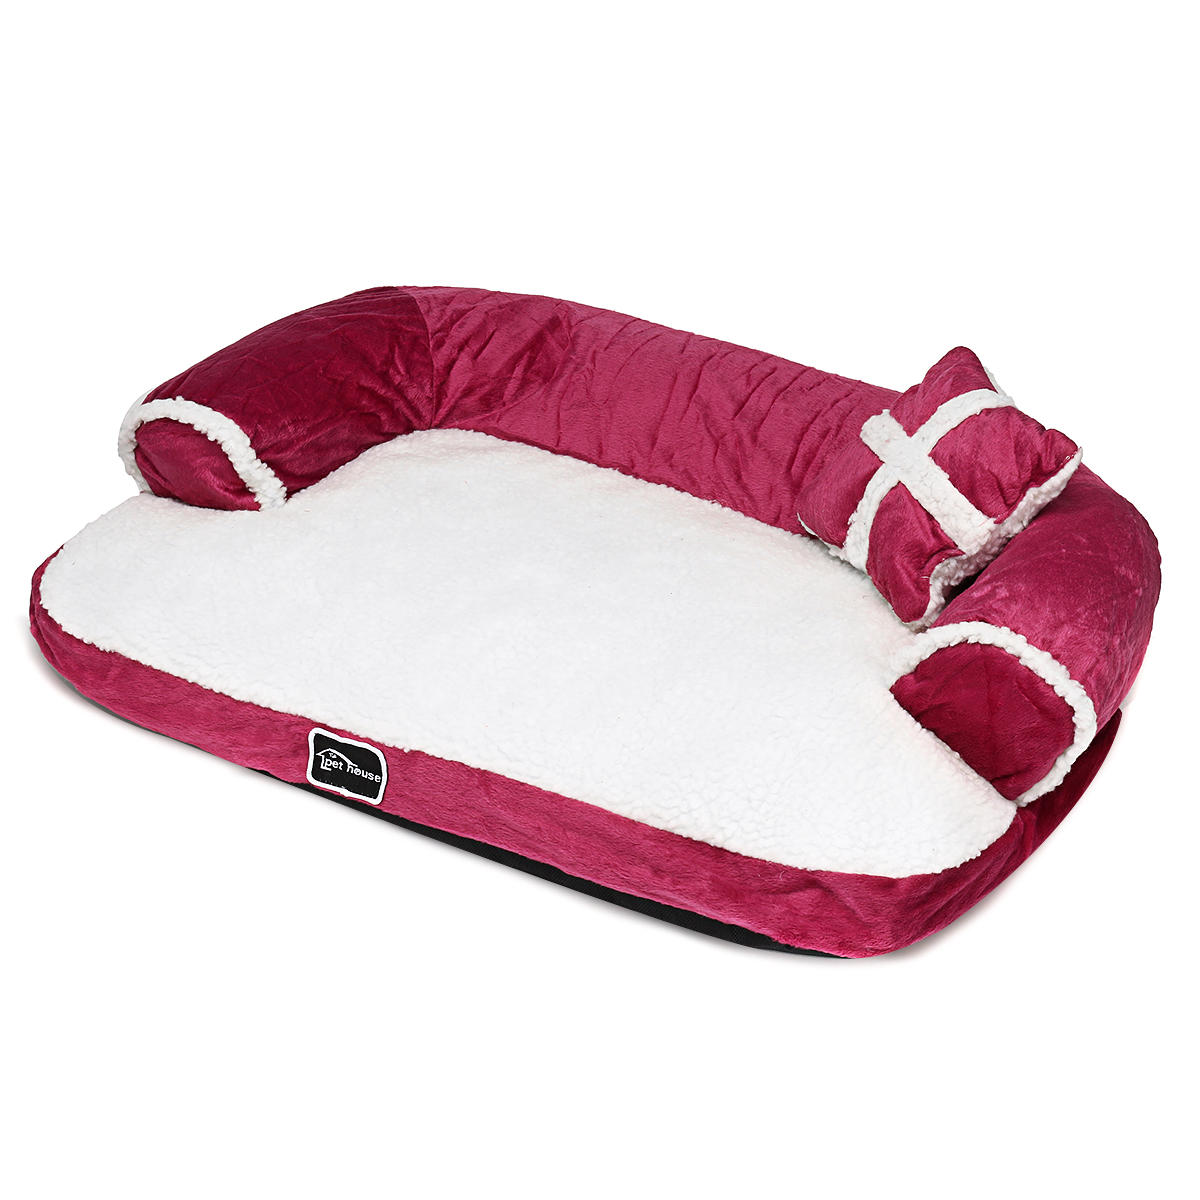 Large Washable Dogs Cats Pet Bed Puppy Sleeping House Soft Warm Kennel Cushion Pillow-heyidear